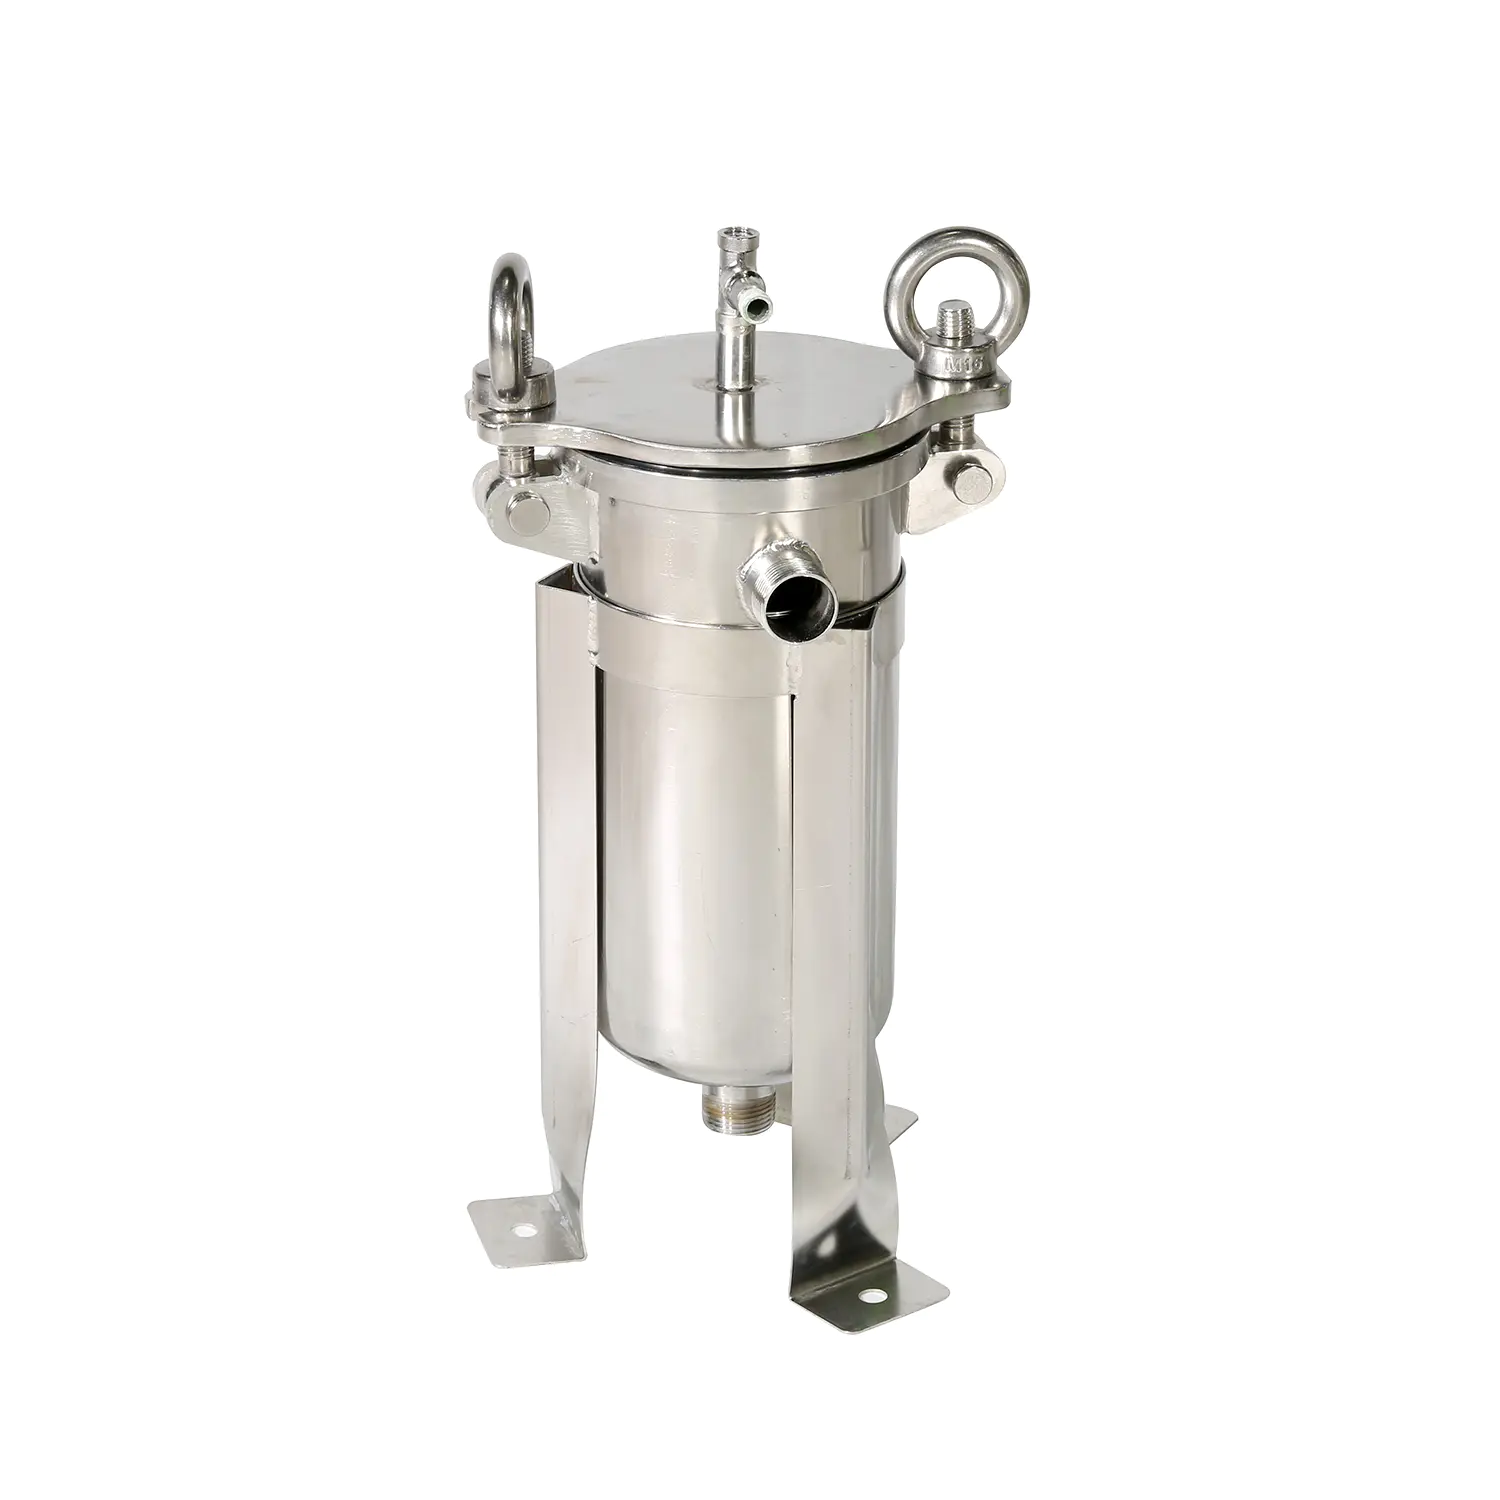 SS stainless steel cartridge filter housing 40 inch